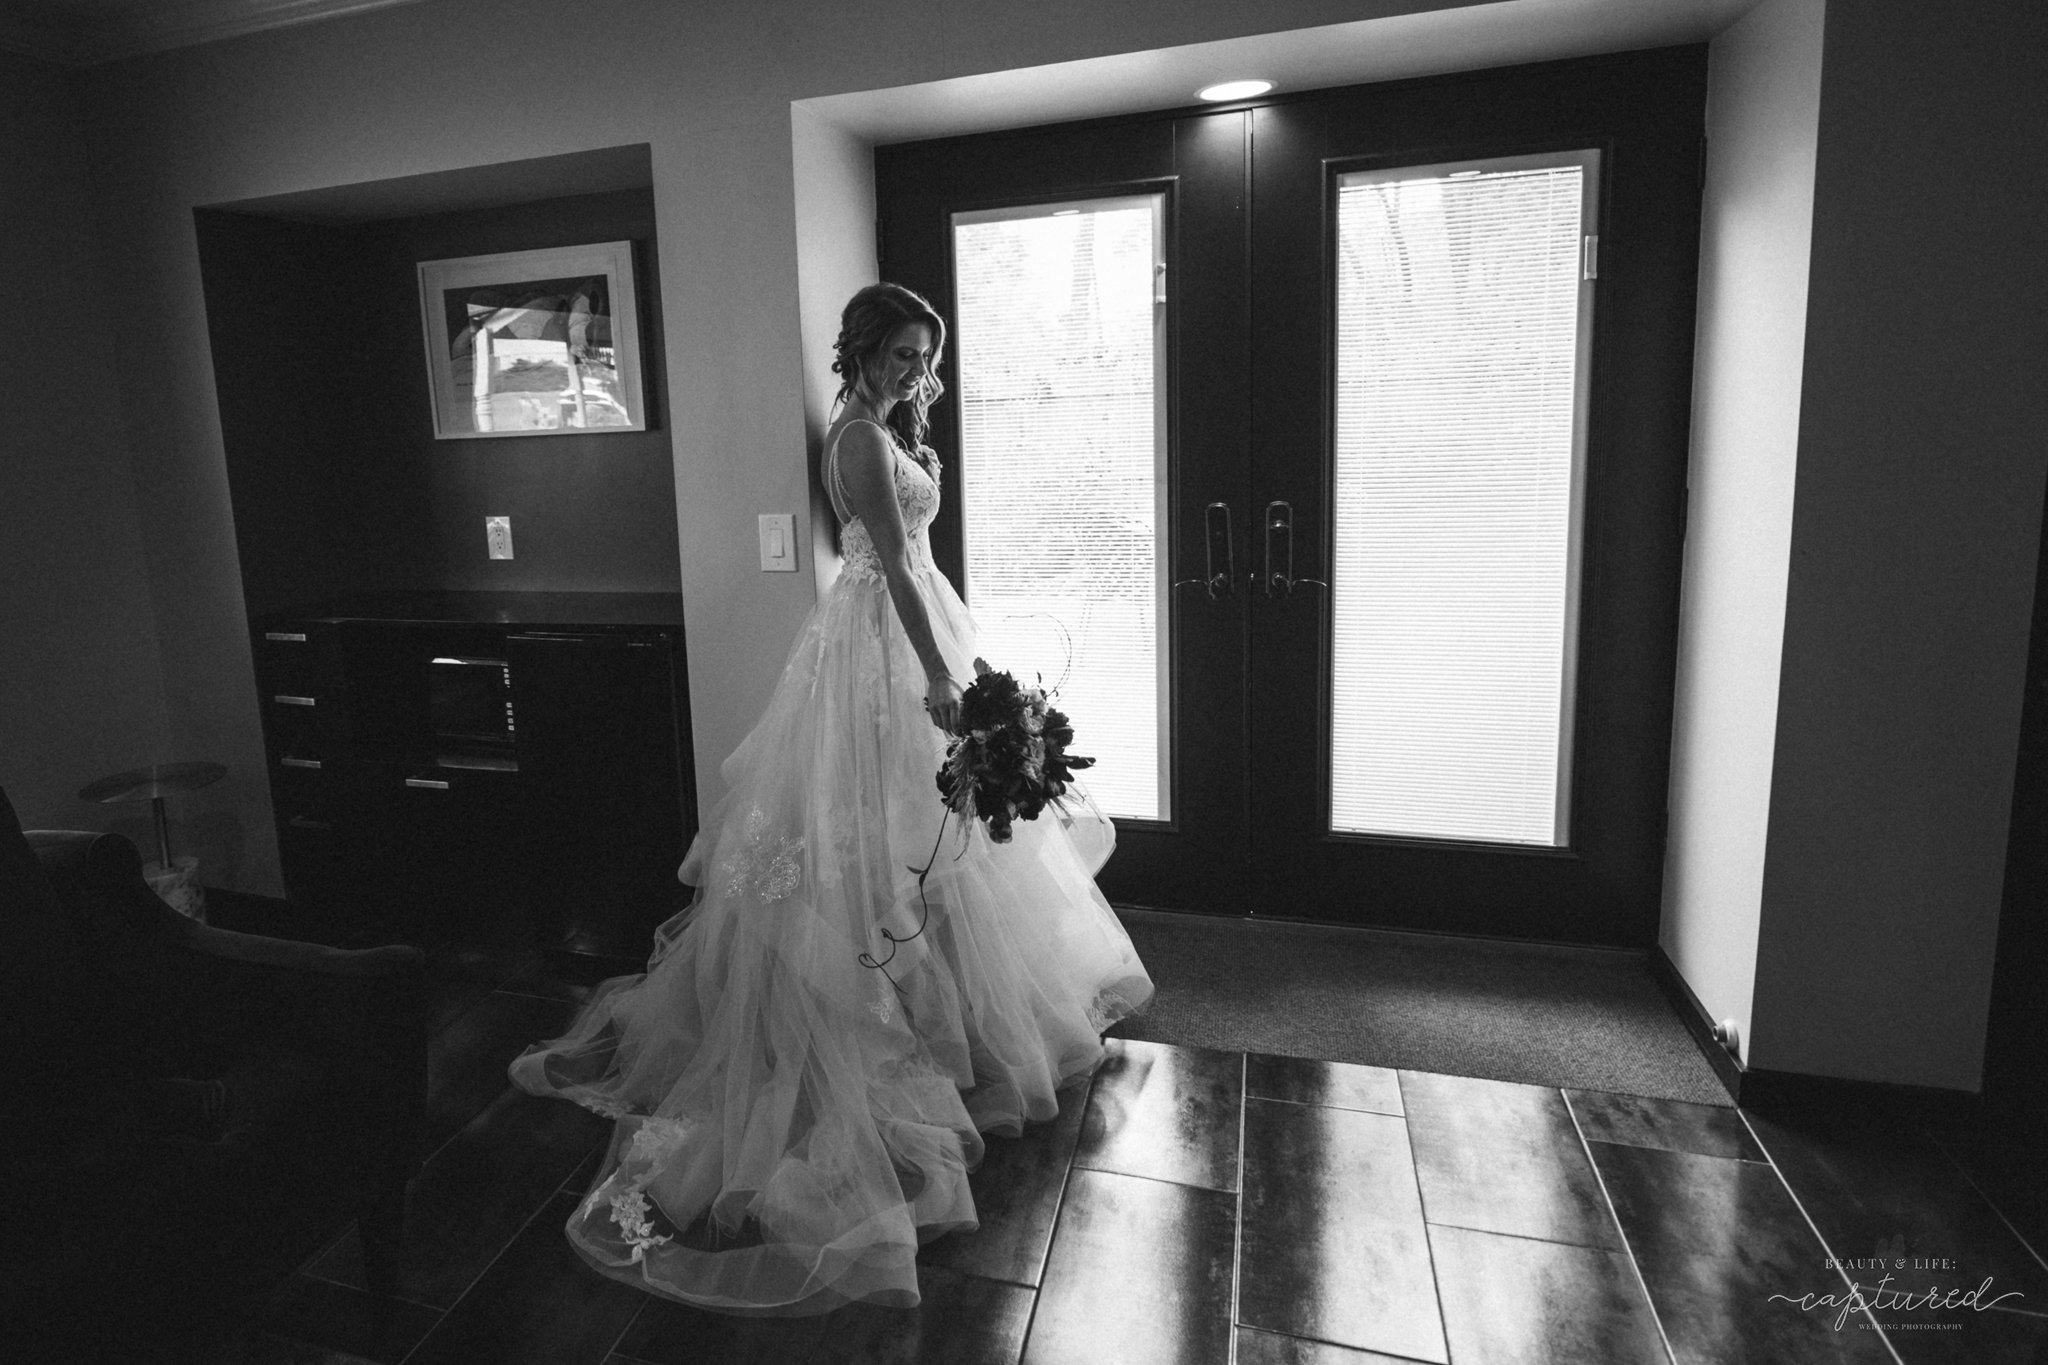 Beauty_and_Life_Captured_Jacquelyn_and_Adrian_Wedding-139.jpg